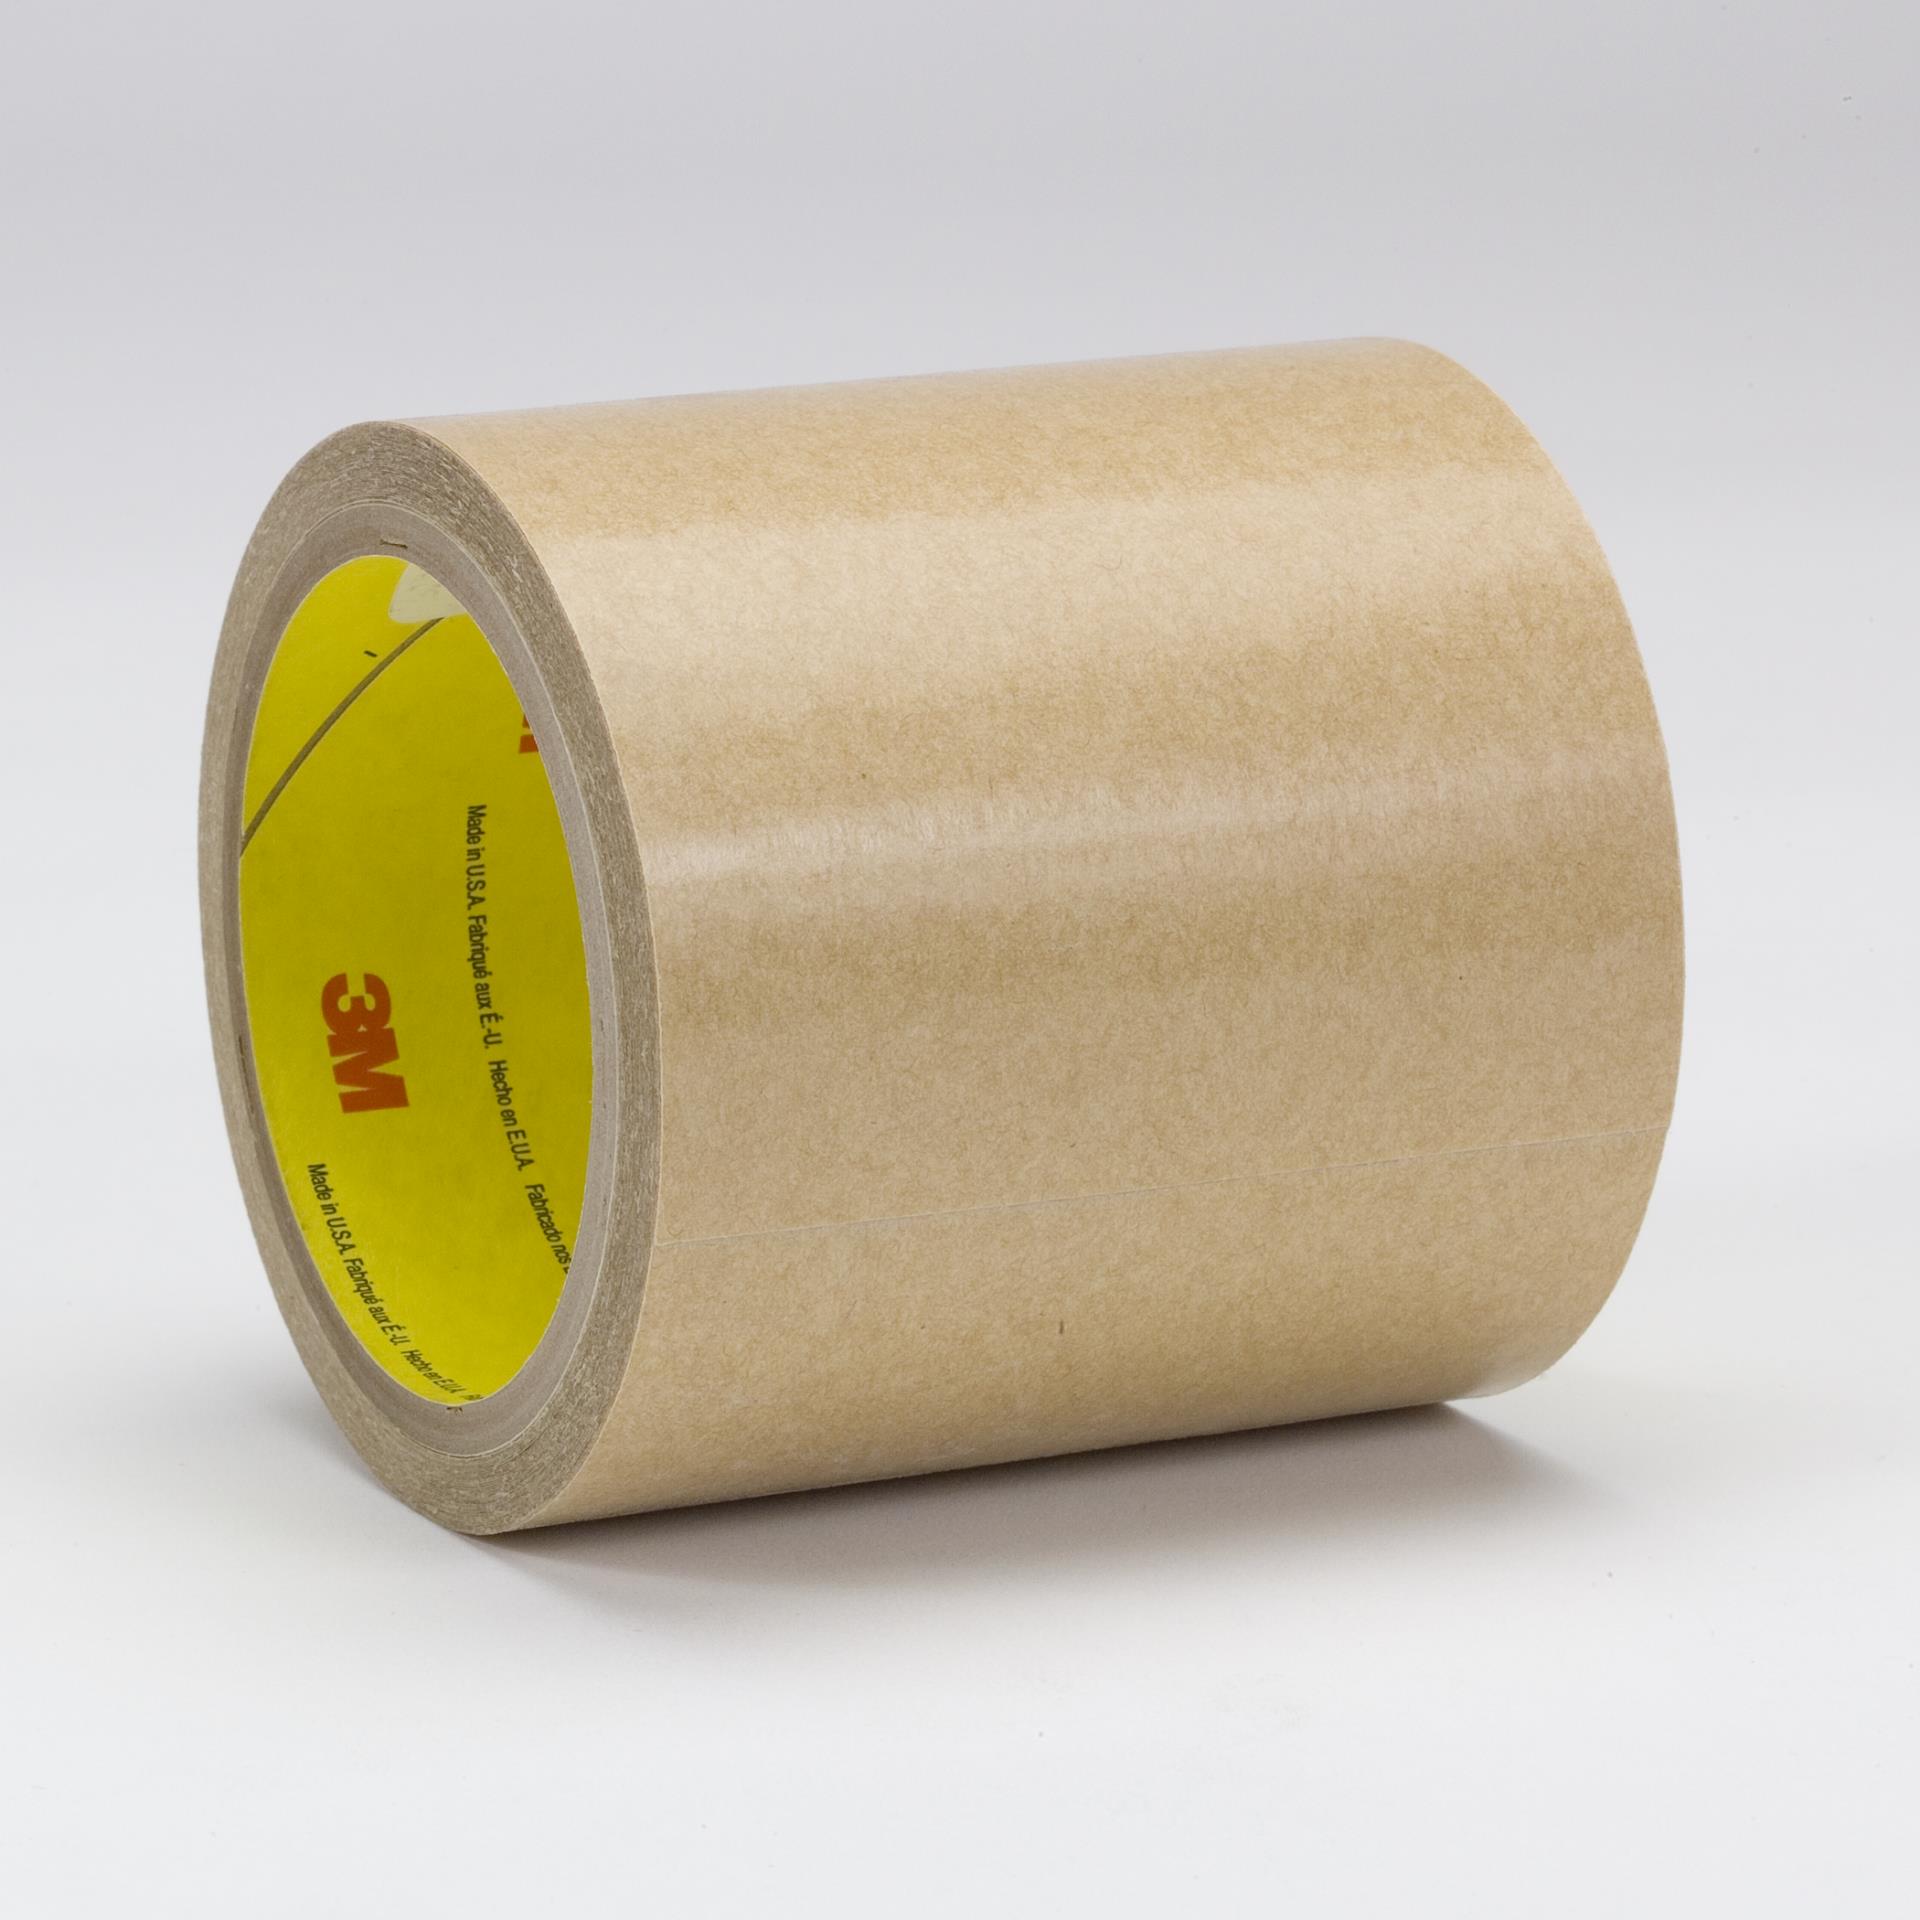 https://www.e-aircraftsupply.com/ItemImages/40/7010372840_3M_Adhesive_Transfer_Tape_9675_Clear.jpg